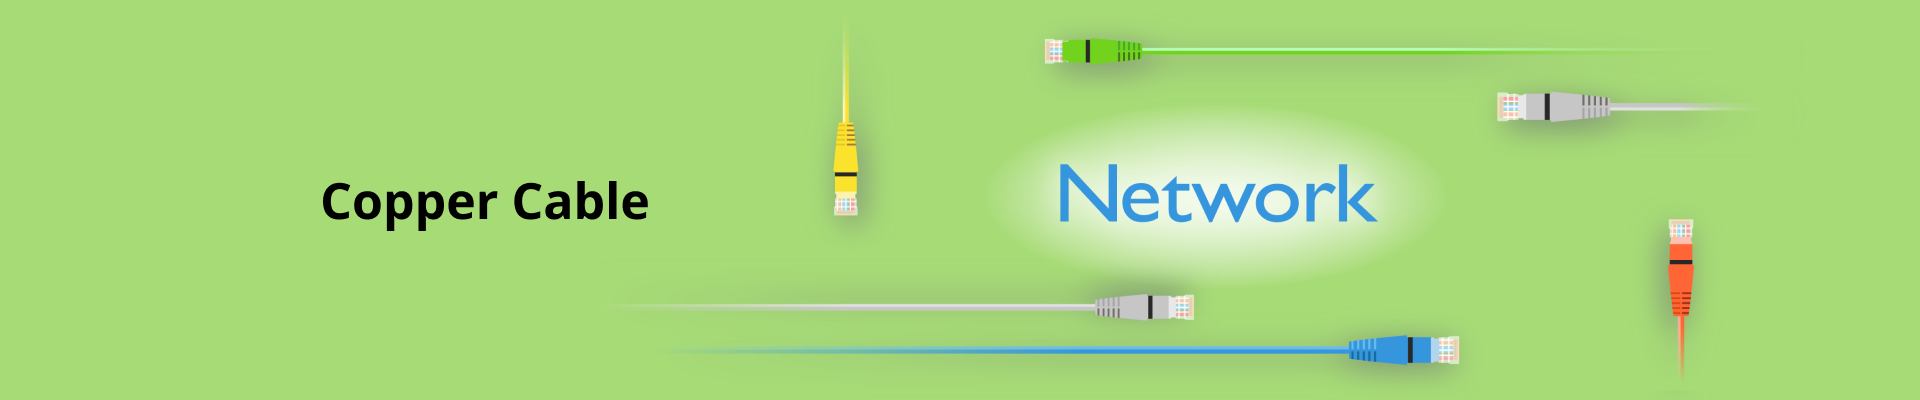 LAN Cables,Copper Cable,Ethernet Cable,Network,Switch Center,Boot,Plug